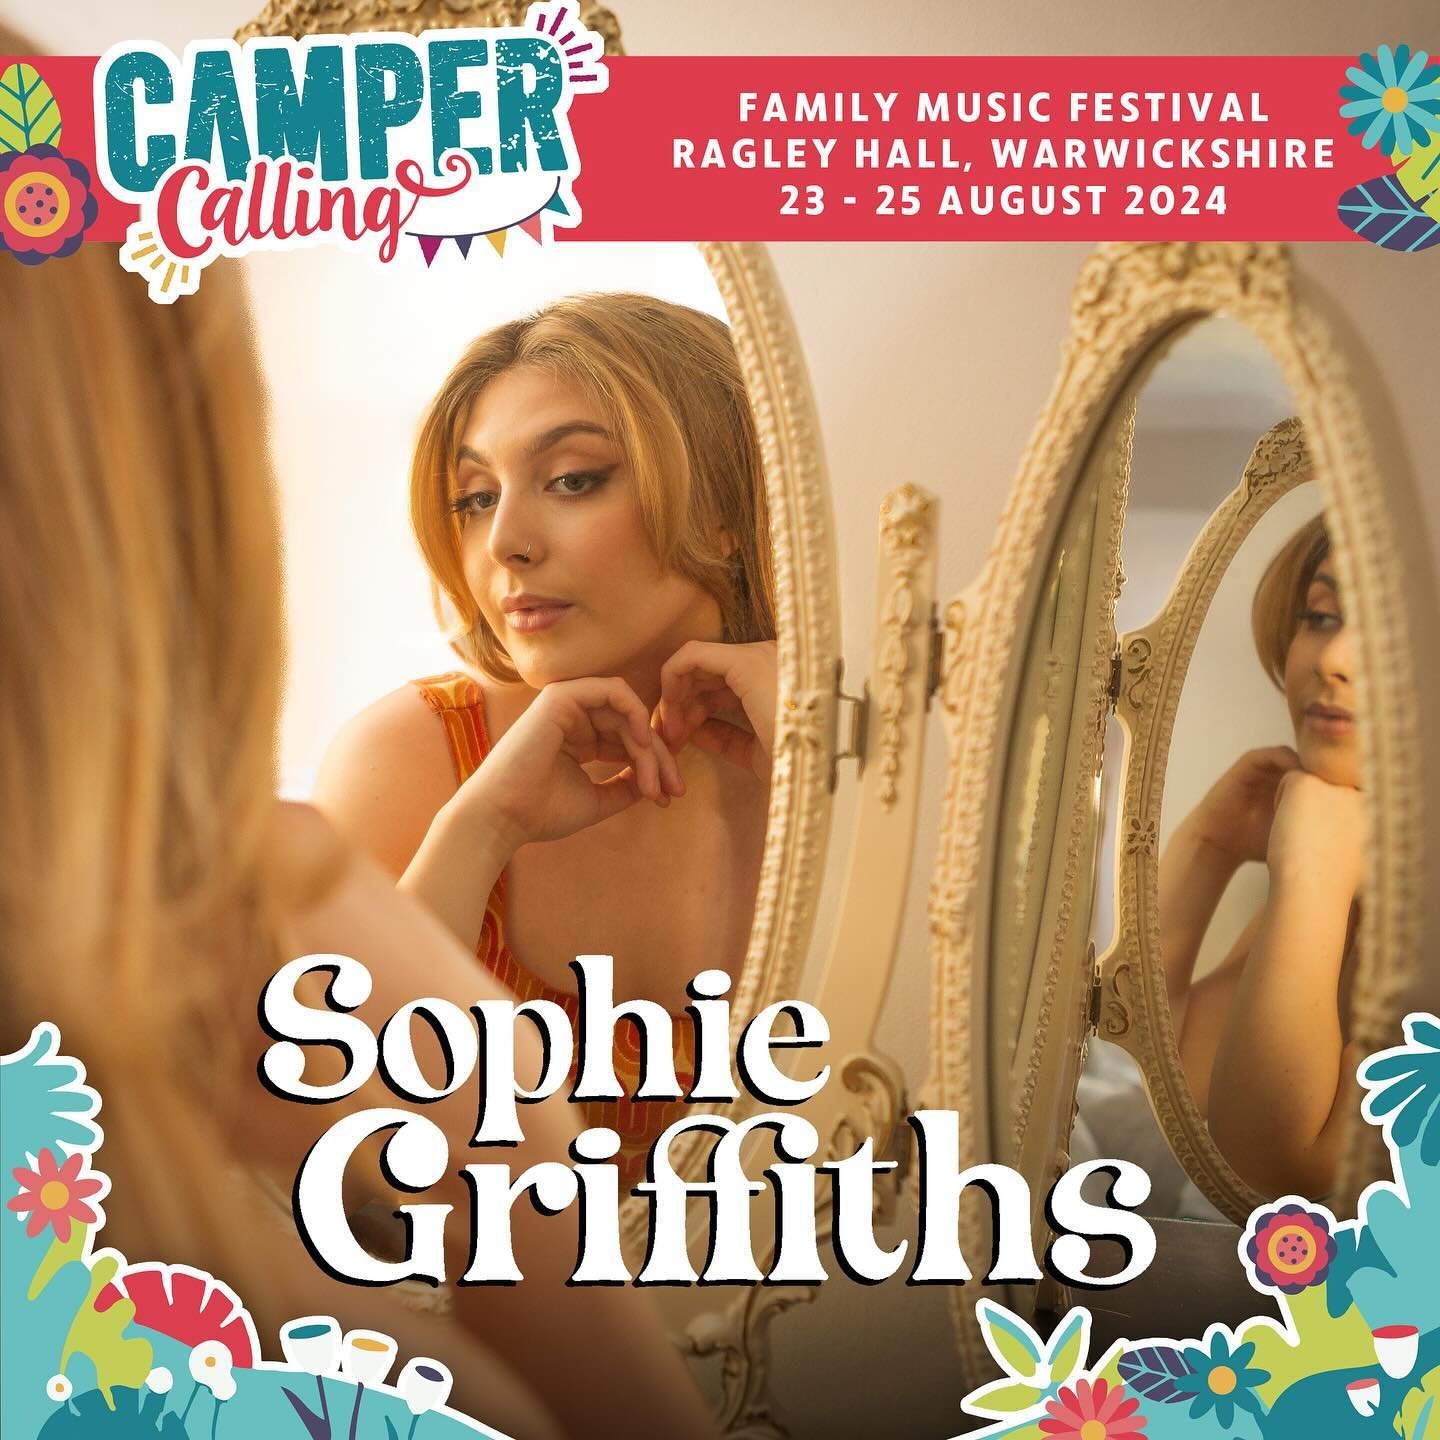 EEEEK! Absolutely buzzing to announce I&rsquo;ll be playing @campercalling on Sunday 25th August 🤩 I&rsquo;ll be playing on the freshly squeezed stage 🧡 SEE YA THERE x